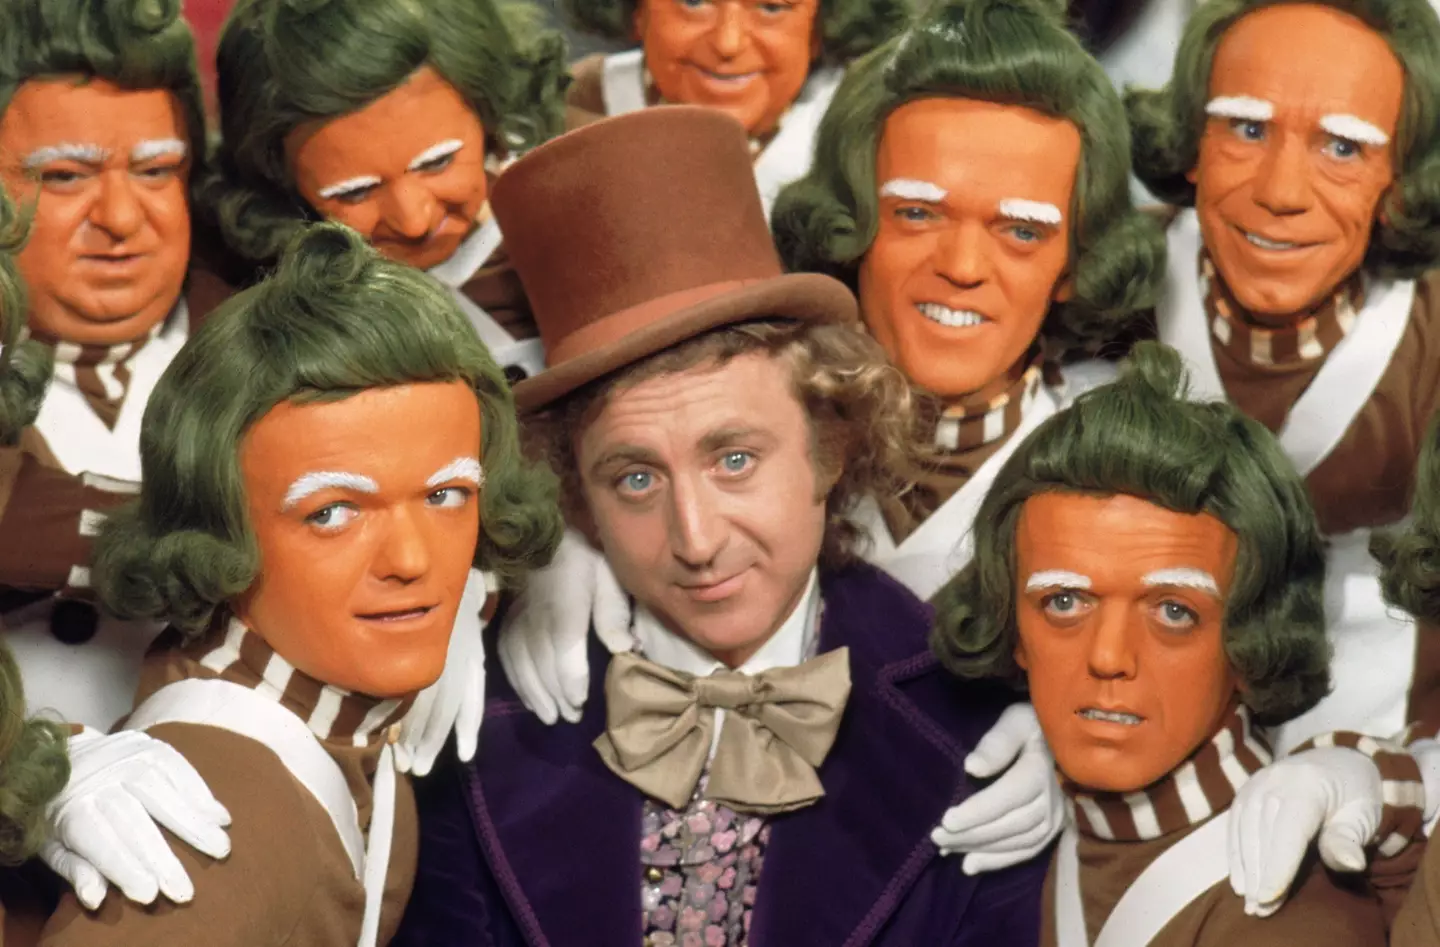 Wonka is set to be a prequel movie telling the story of a young Willy Wonka.